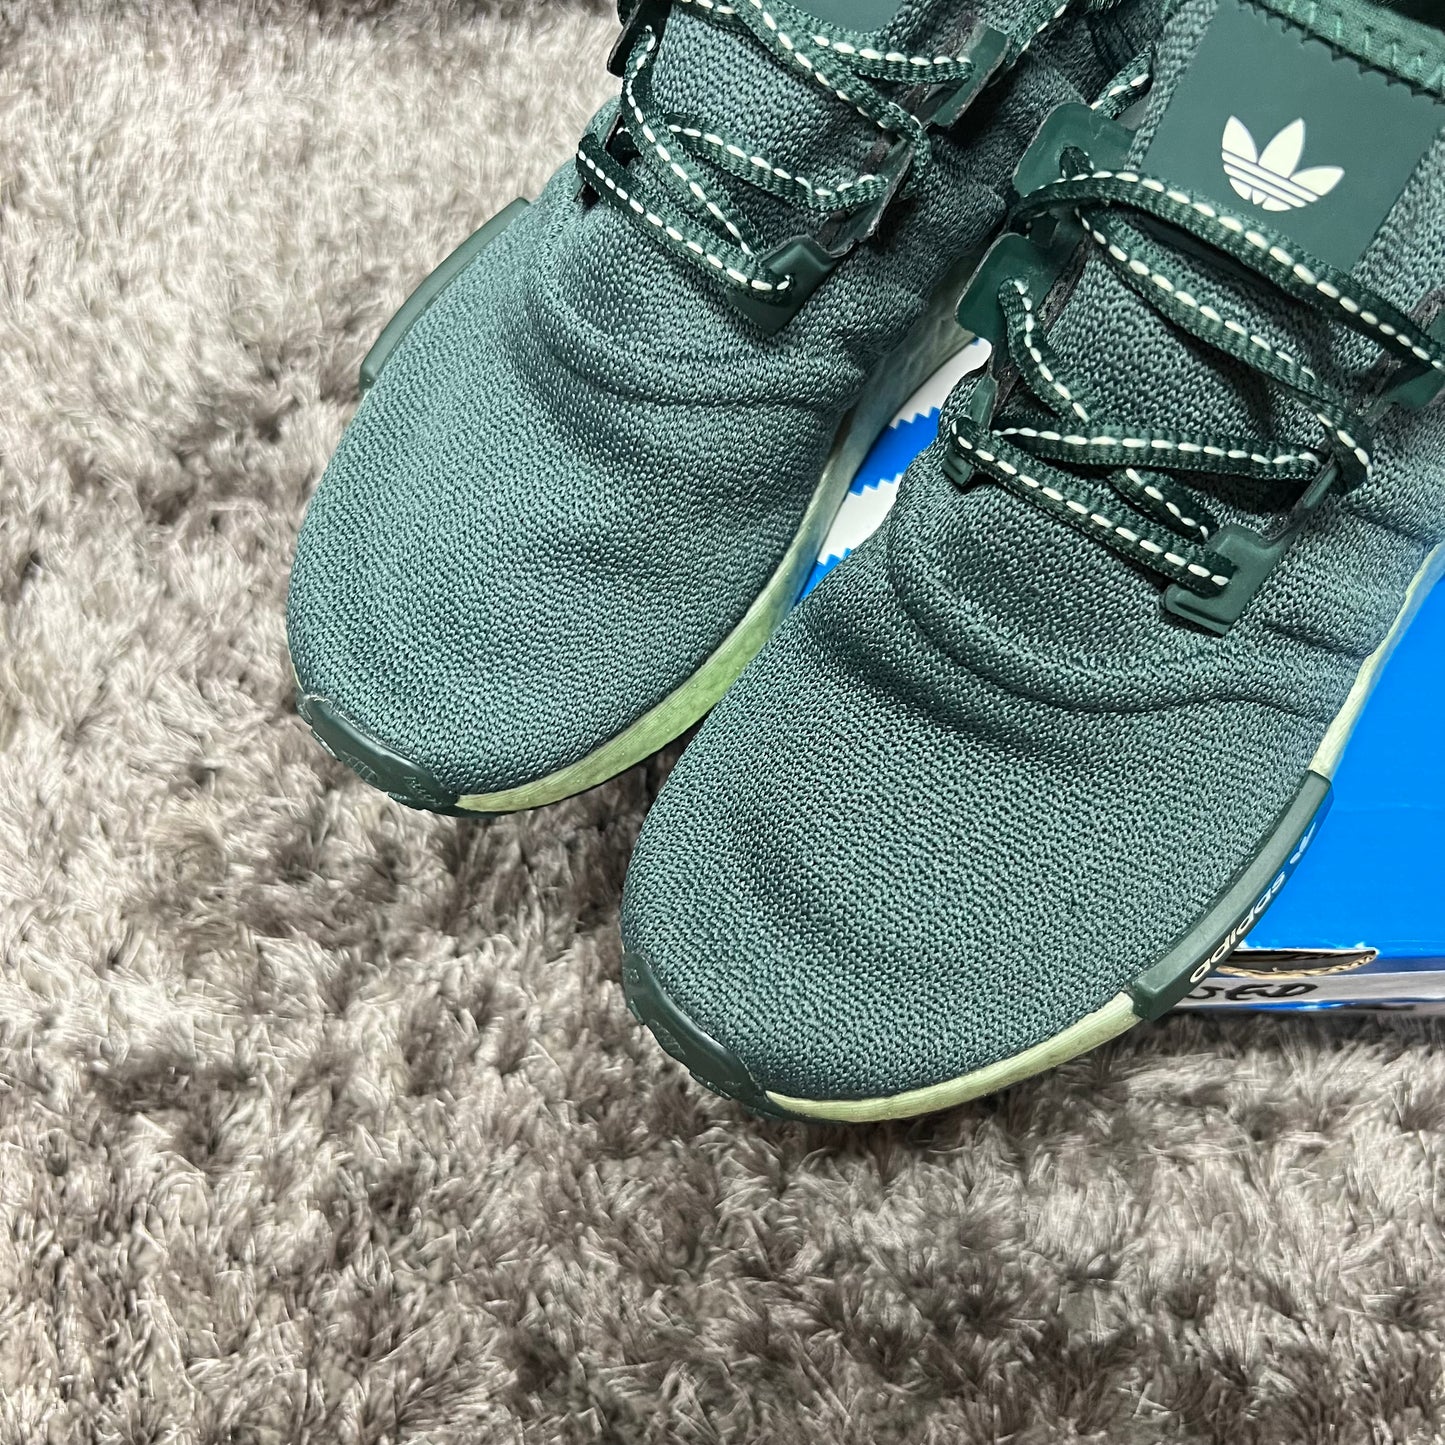 Adidas NMD R1 Linen Green size 7w used